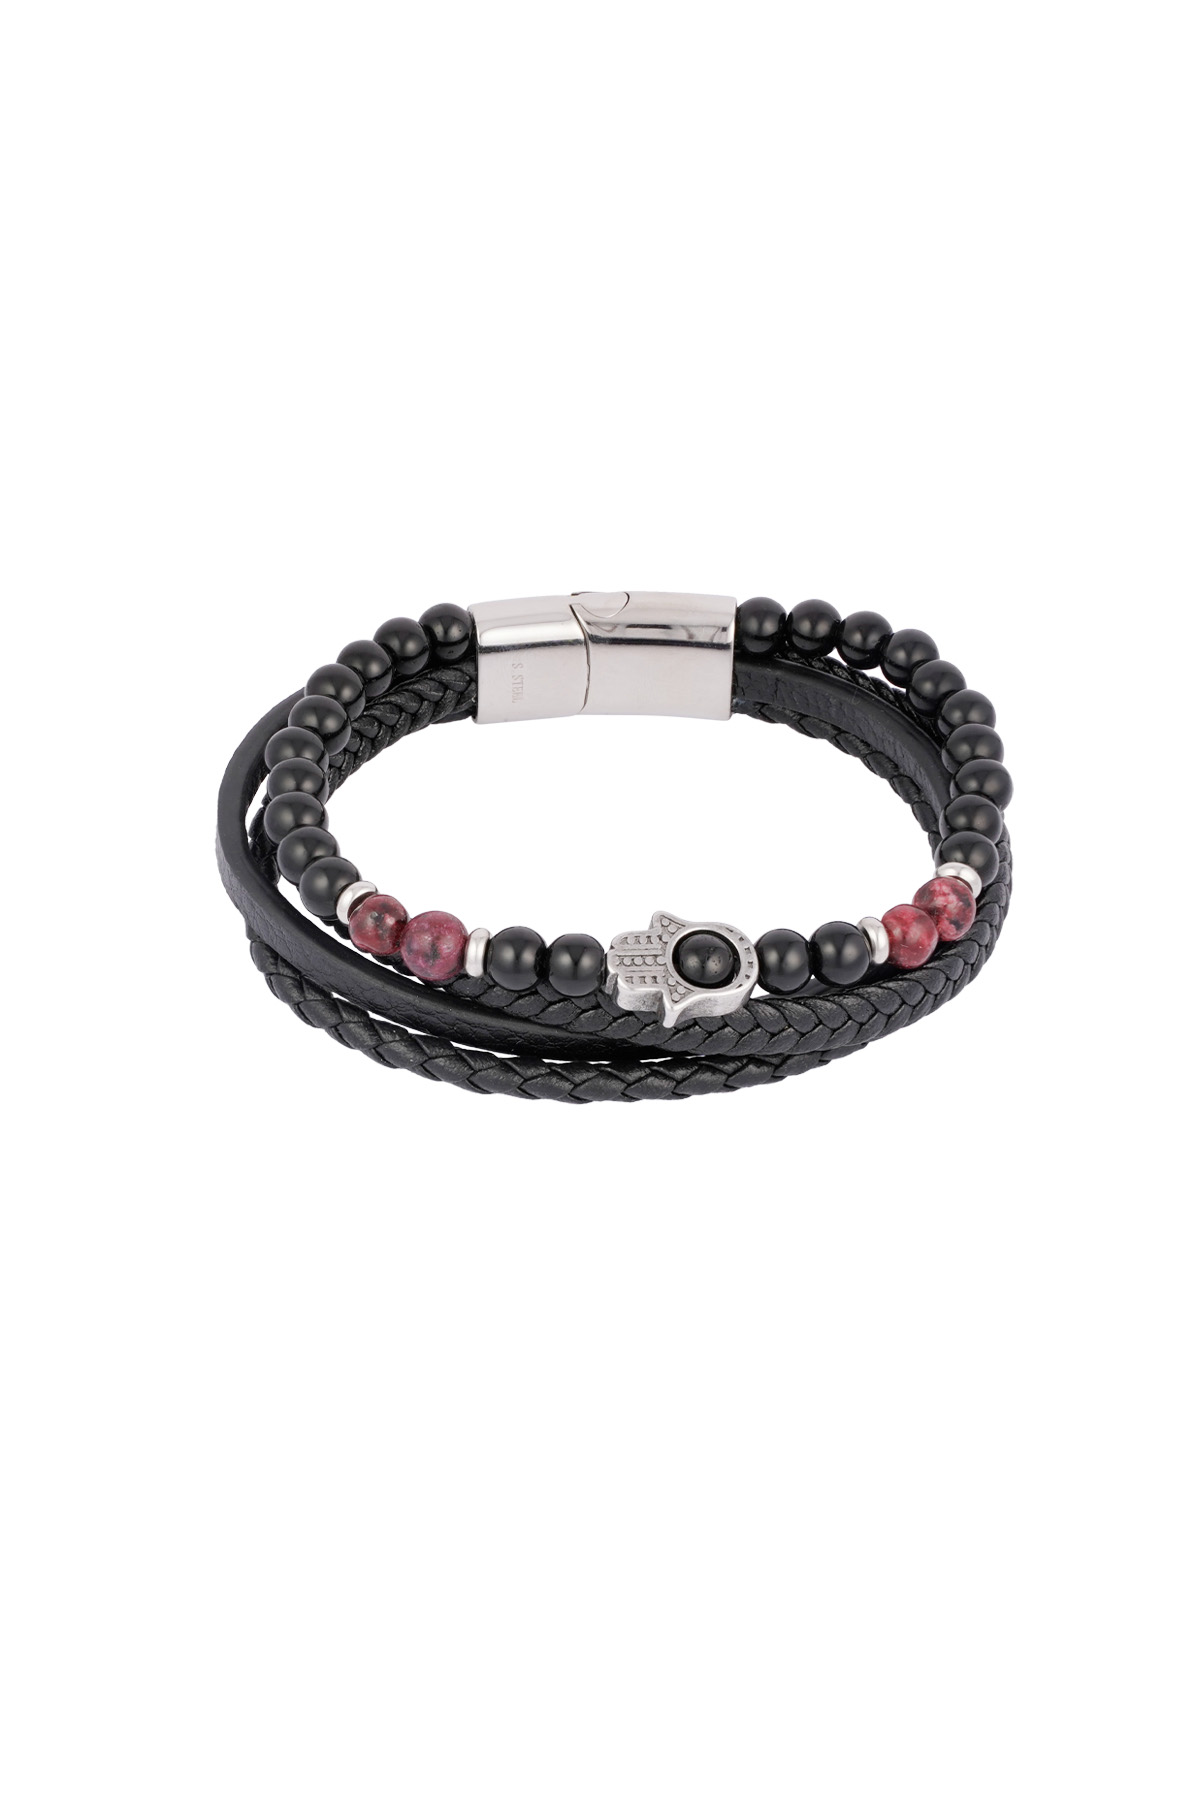 Double men's bracelet with hand charm - Wine Red h5 